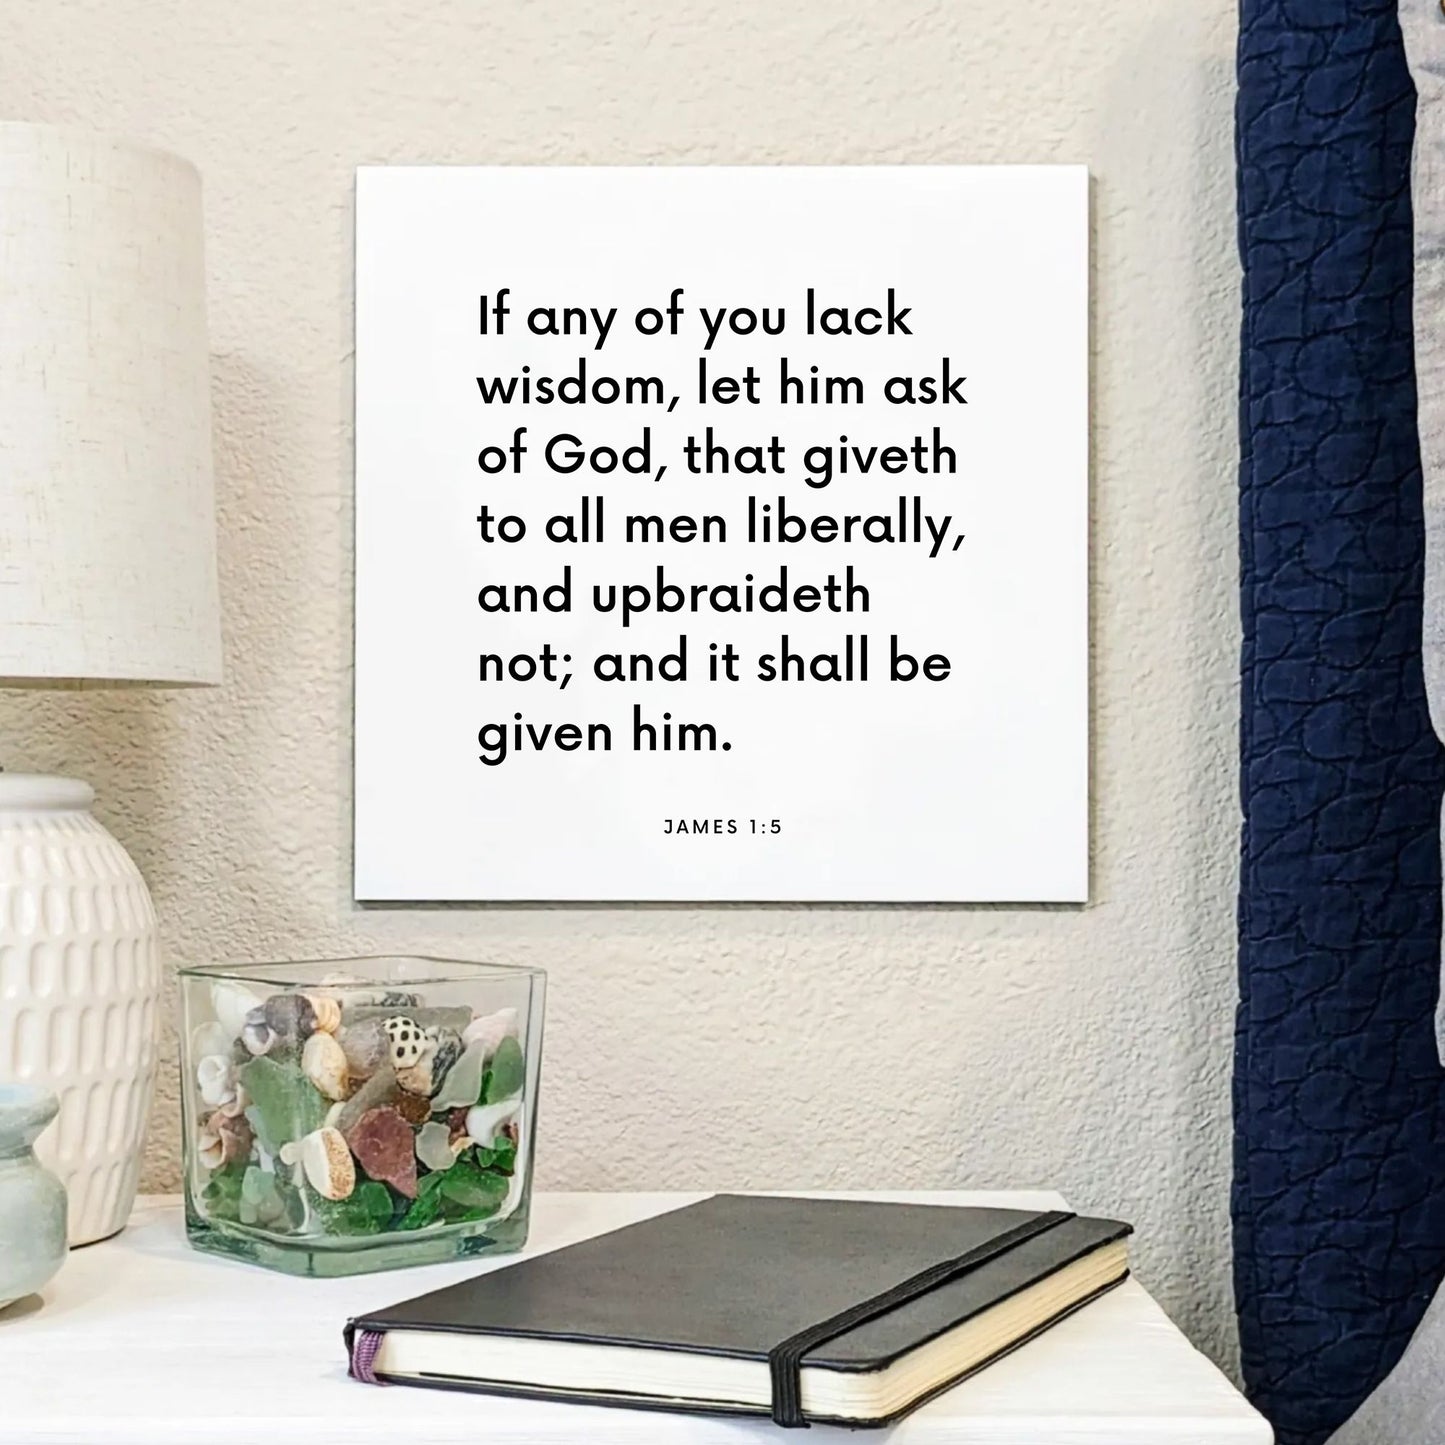 Bedside mouting of the scripture tile for James 1:5 - "If any of you lack wisdom, let him ask of God"